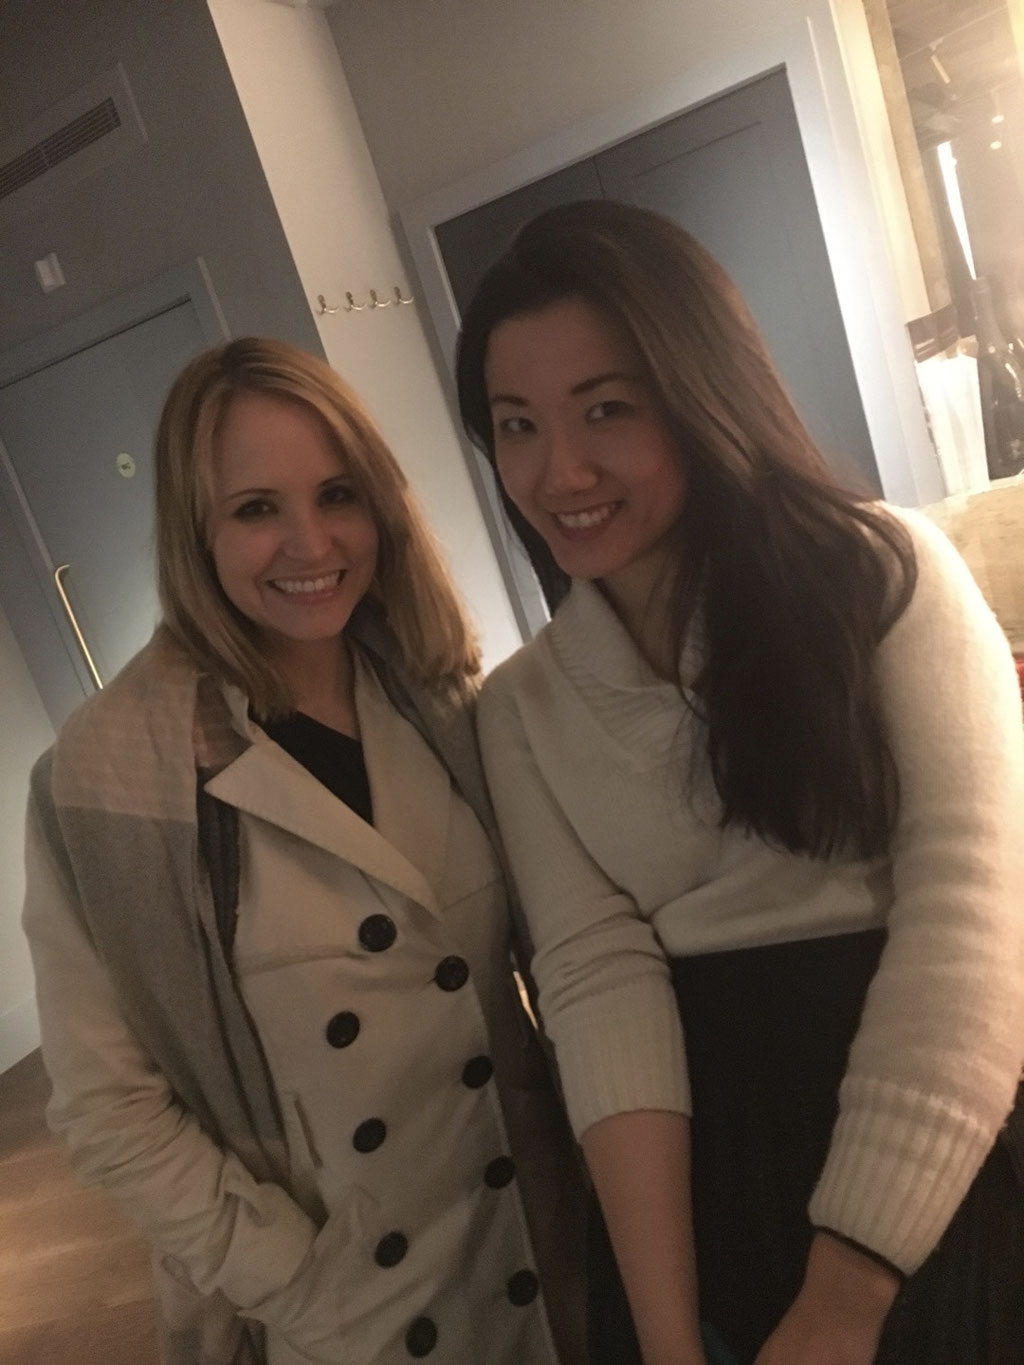 Jillian and Lu Li, founder of "Blooming Founders" and author of "Dear Female Founder"